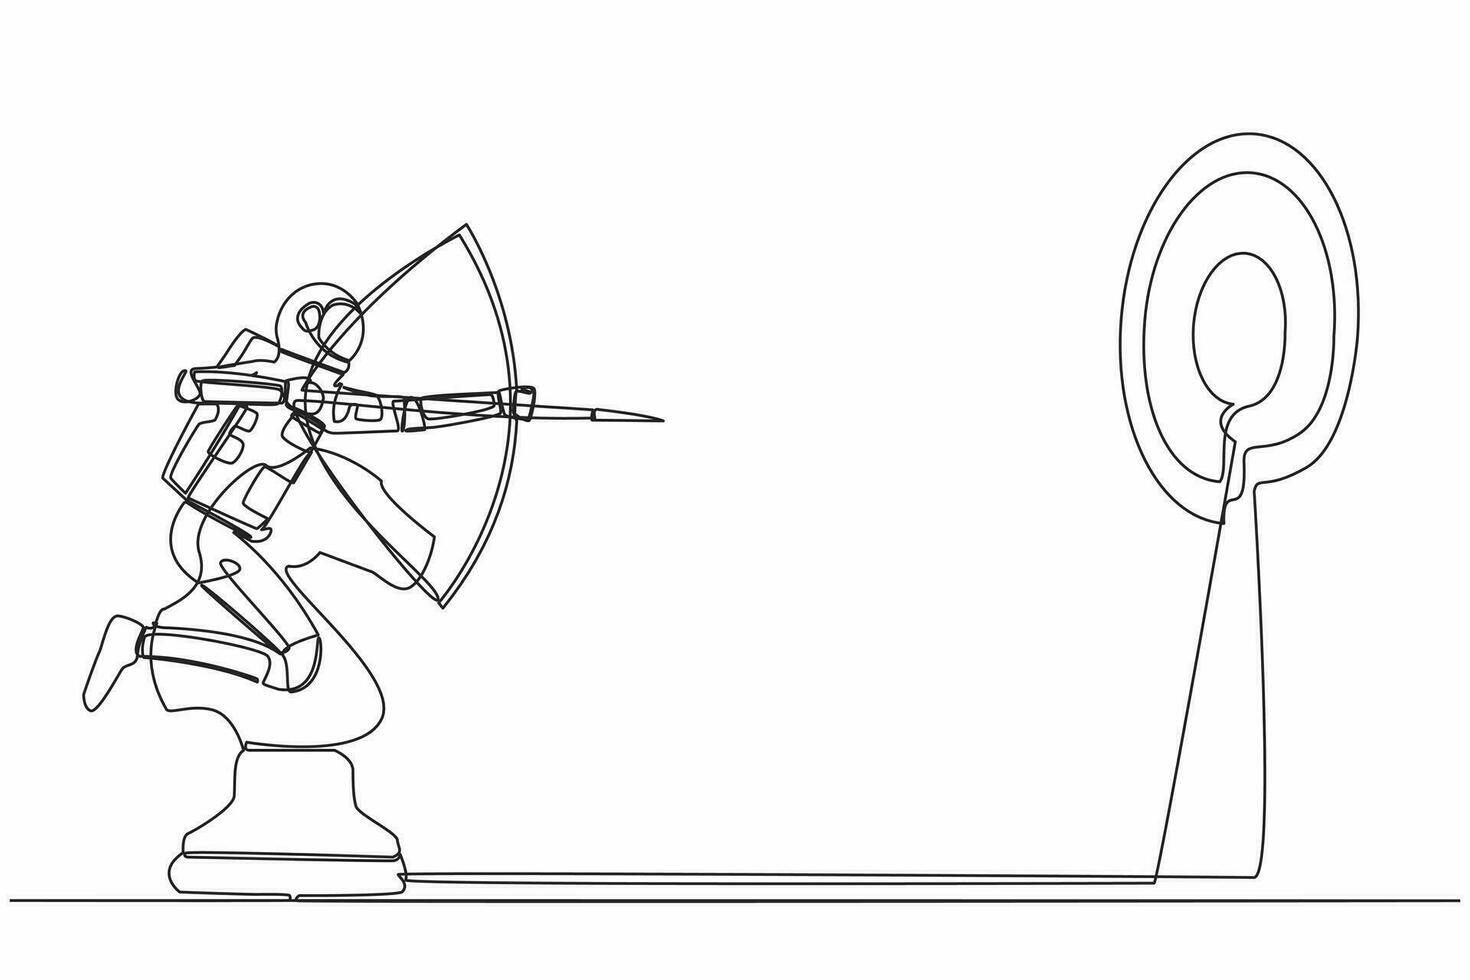 Single one line drawing astronaut holding arrow and aiming target while riding chess knight horse in moon surface. Cosmic galaxy space concept. Continuous line draw design graphic vector illustration